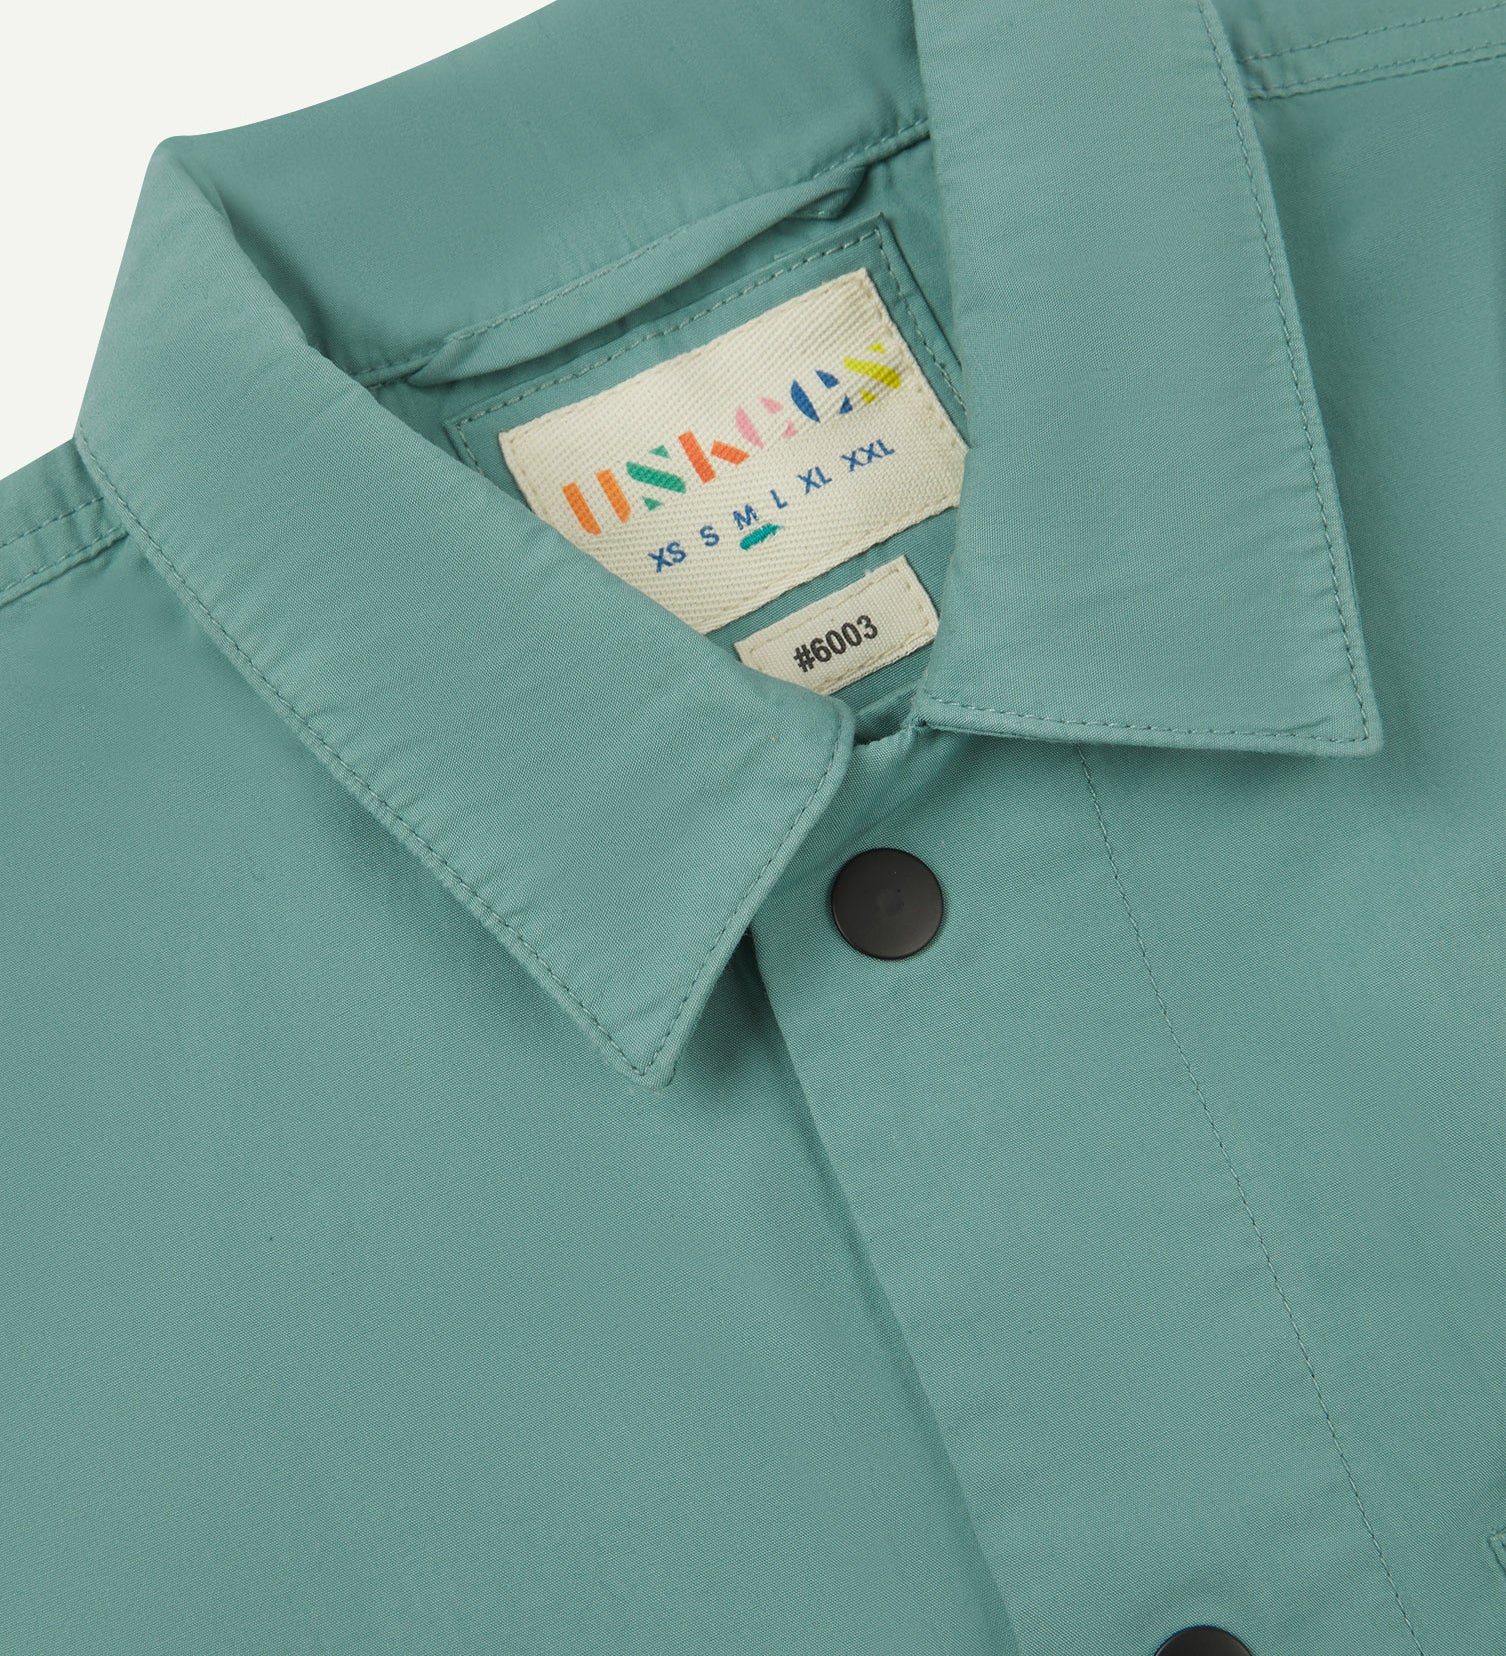 close up shot of Uskees eucalyptus men's #6003 shirt showing collar and black popper detail